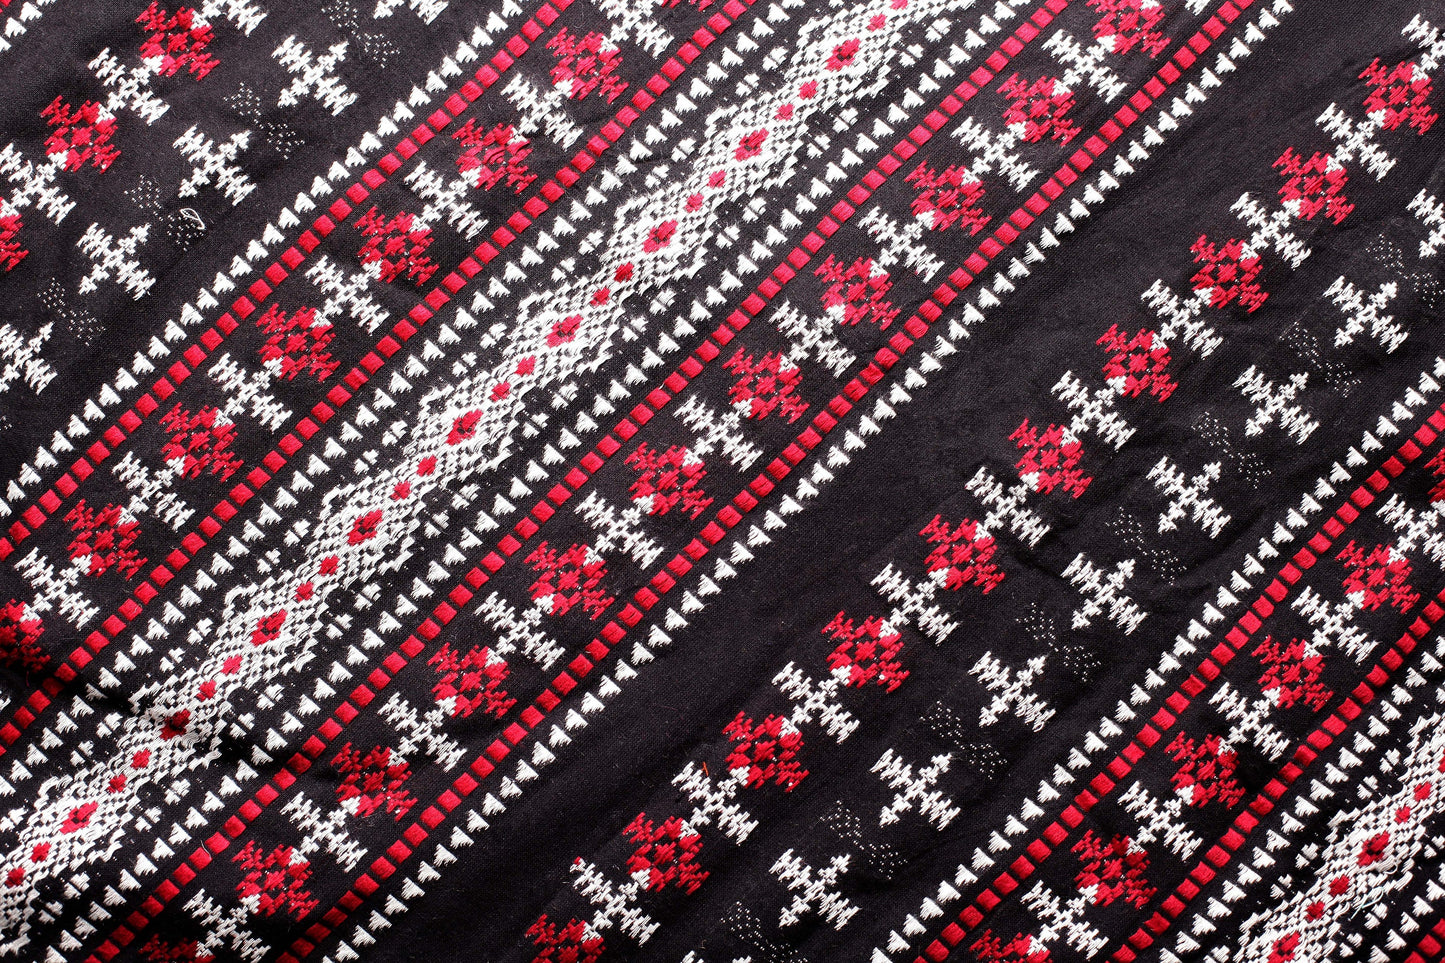 Red, Black and White Woven Fabric with Aztec Patterns